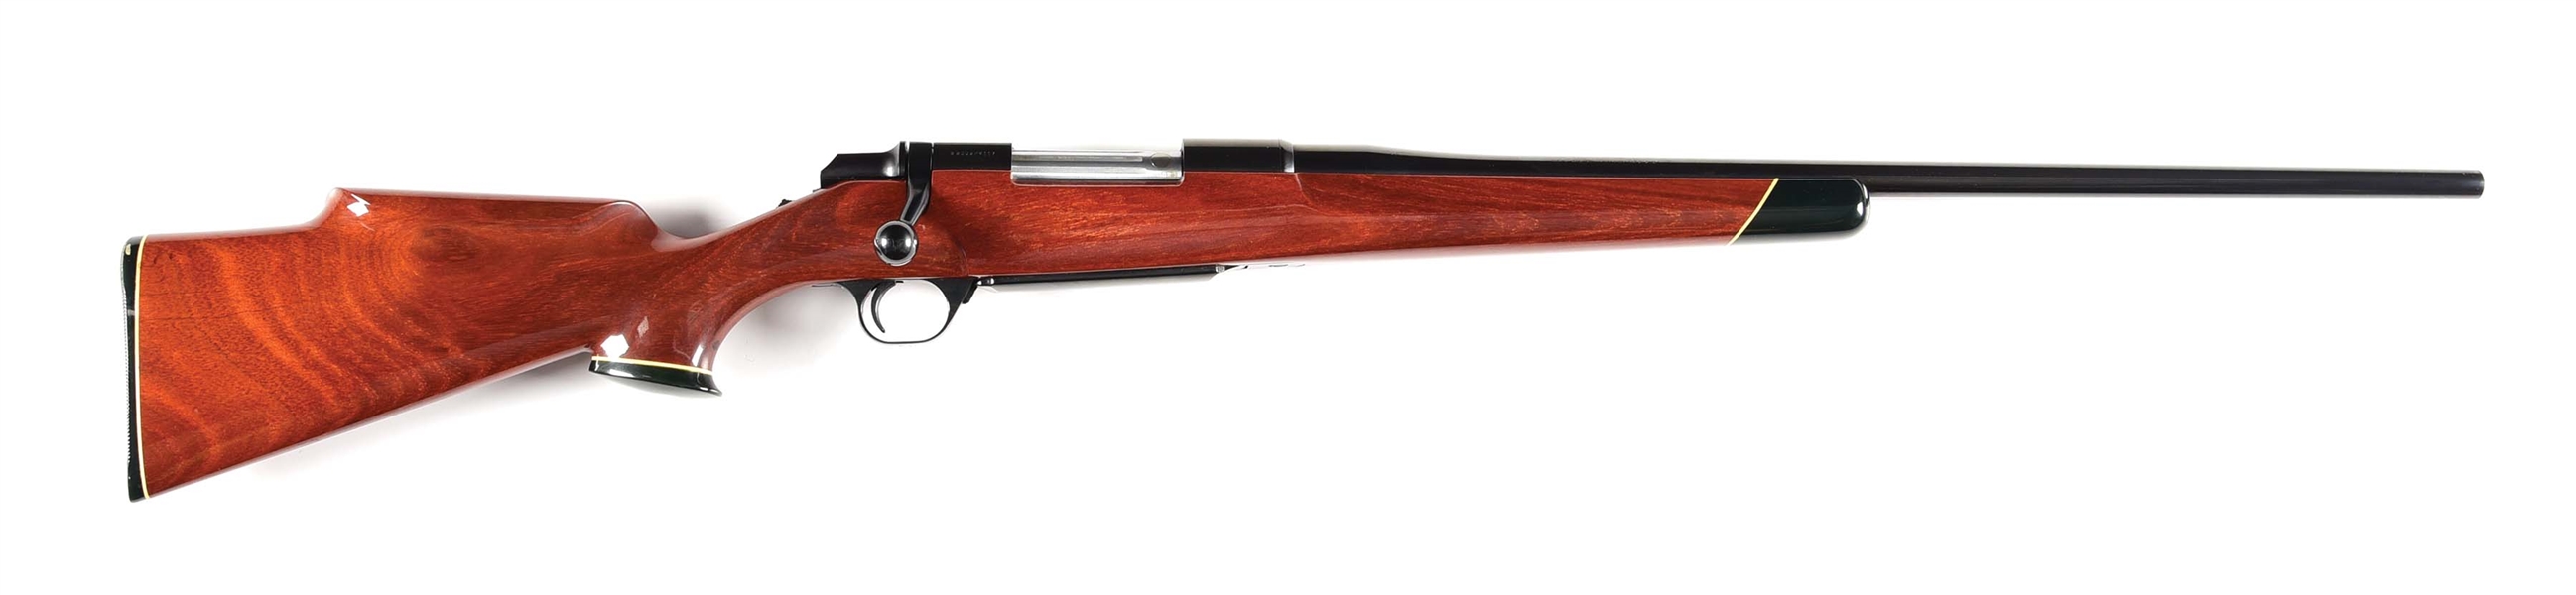 (M) BRAZIL WOOD STOCKED BROWNING BBR BOLT ACTION RIFLE.